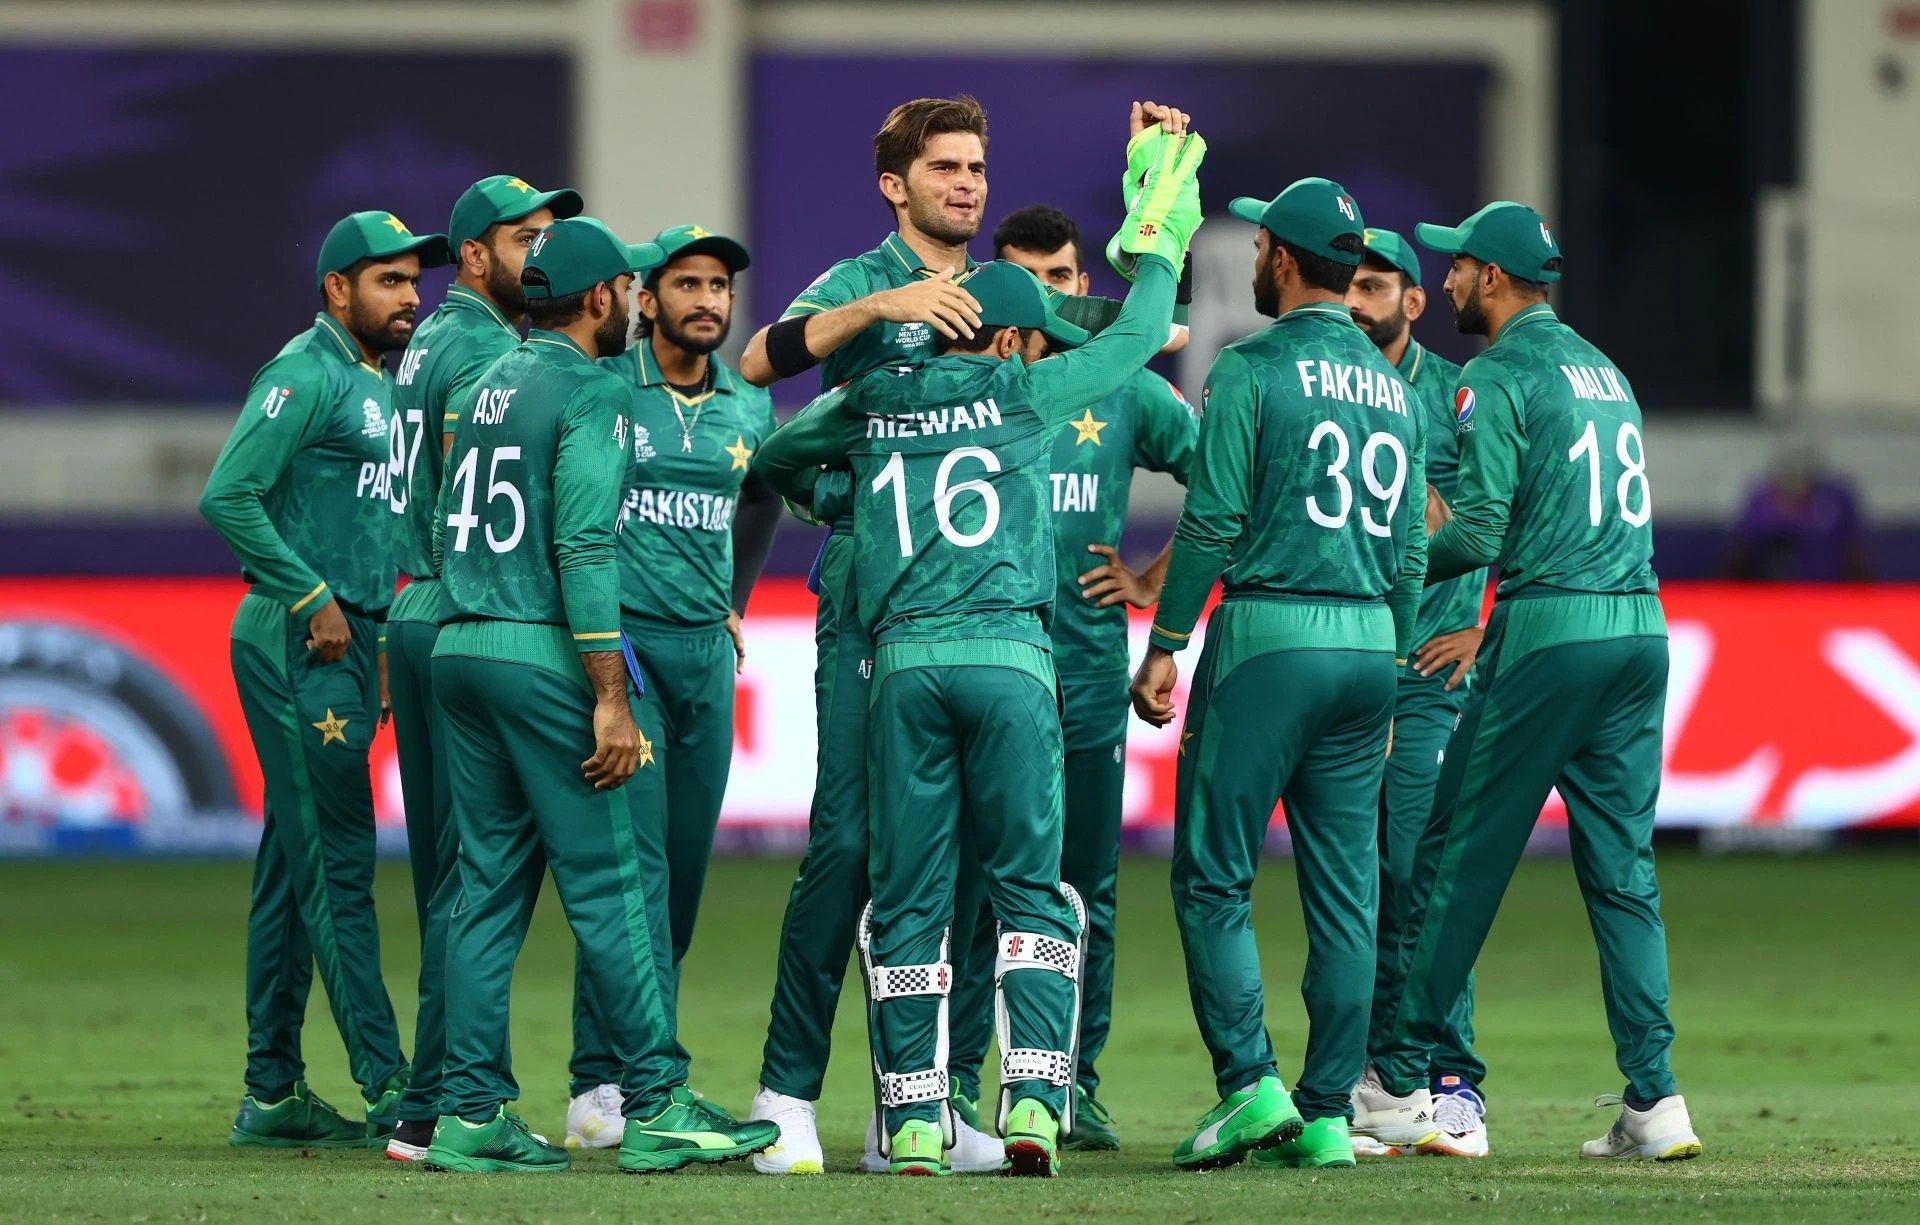 Pakistan T20 WC Squad: BIG relief for Pakistan as premium pacer Shaheen Shah Afridi returns to bowling ahead of ICC T20 World Cup - WATCH Video. ICC T20 WC